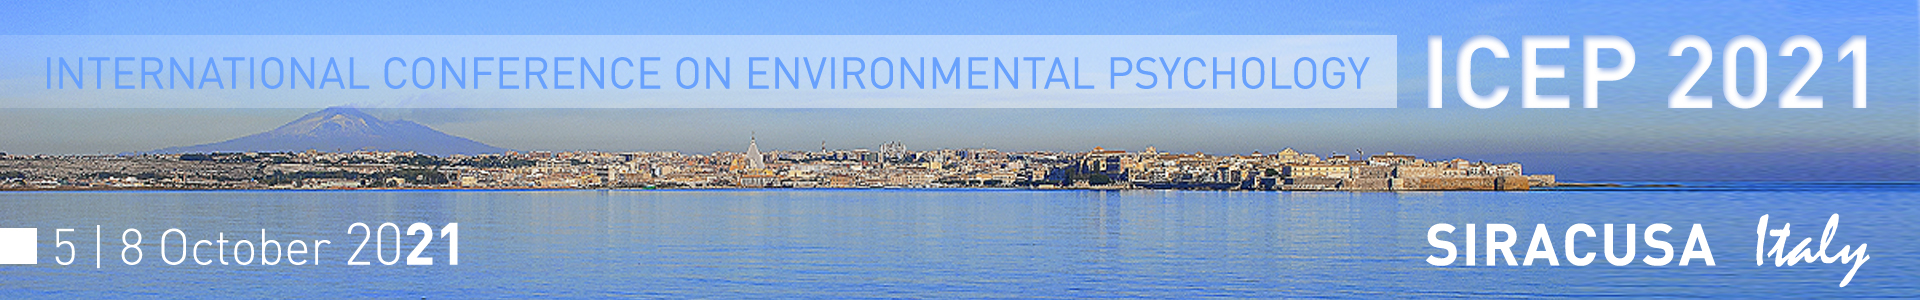 ICEP 2021 International Conference on Environmental Psychology